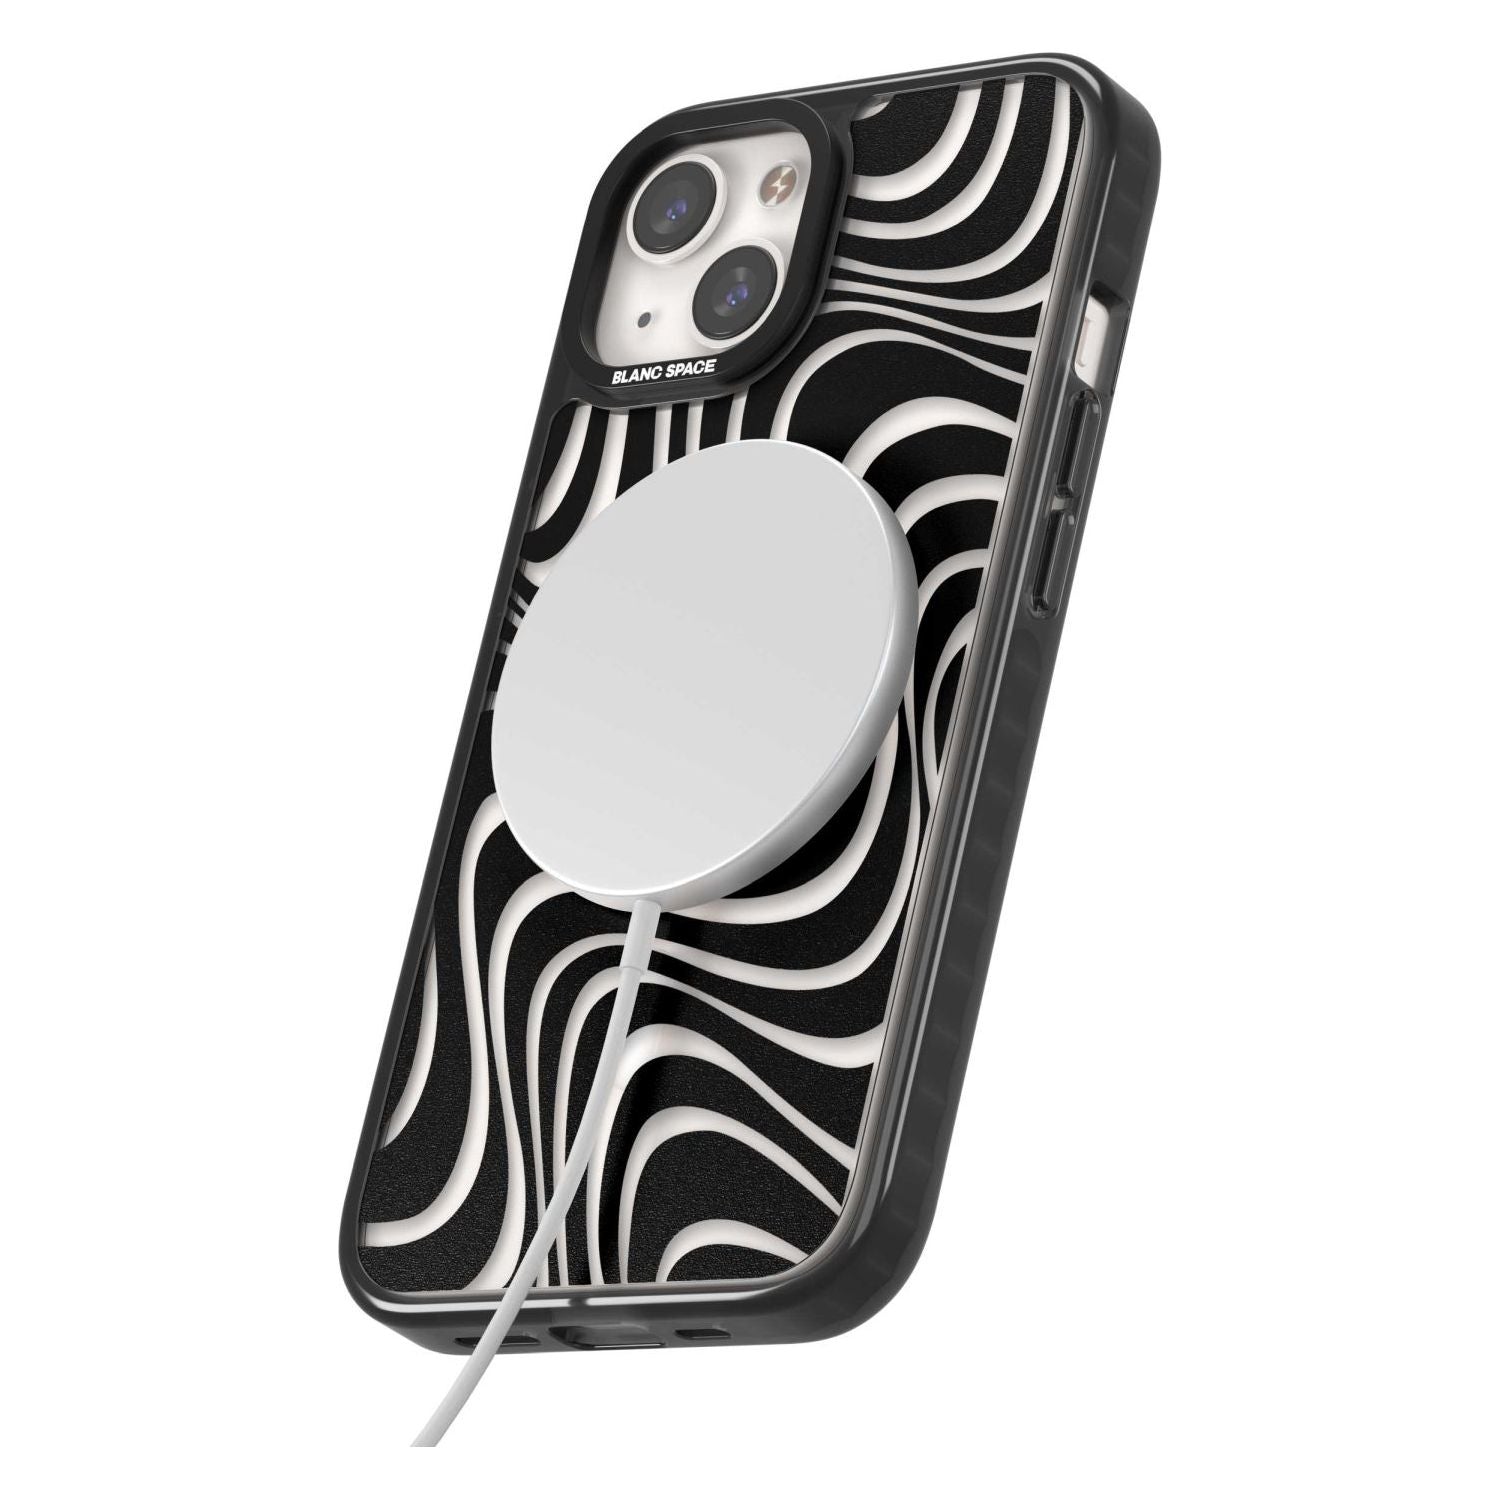 Abstract Waves Phone Case iPhone 15 Pro Max / Black Impact Case,iPhone 15 Plus / Black Impact Case,iPhone 15 Pro / Black Impact Case,iPhone 15 / Black Impact Case,iPhone 15 Pro Max / Impact Case,iPhone 15 Plus / Impact Case,iPhone 15 Pro / Impact Case,iPhone 15 / Impact Case,iPhone 15 Pro Max / Magsafe Black Impact Case,iPhone 15 Plus / Magsafe Black Impact Case,iPhone 15 Pro / Magsafe Black Impact Case,iPhone 15 / Magsafe Black Impact Case,iPhone 14 Pro Max / Black Impact Case,iPhone 14 Plus / Black Impact